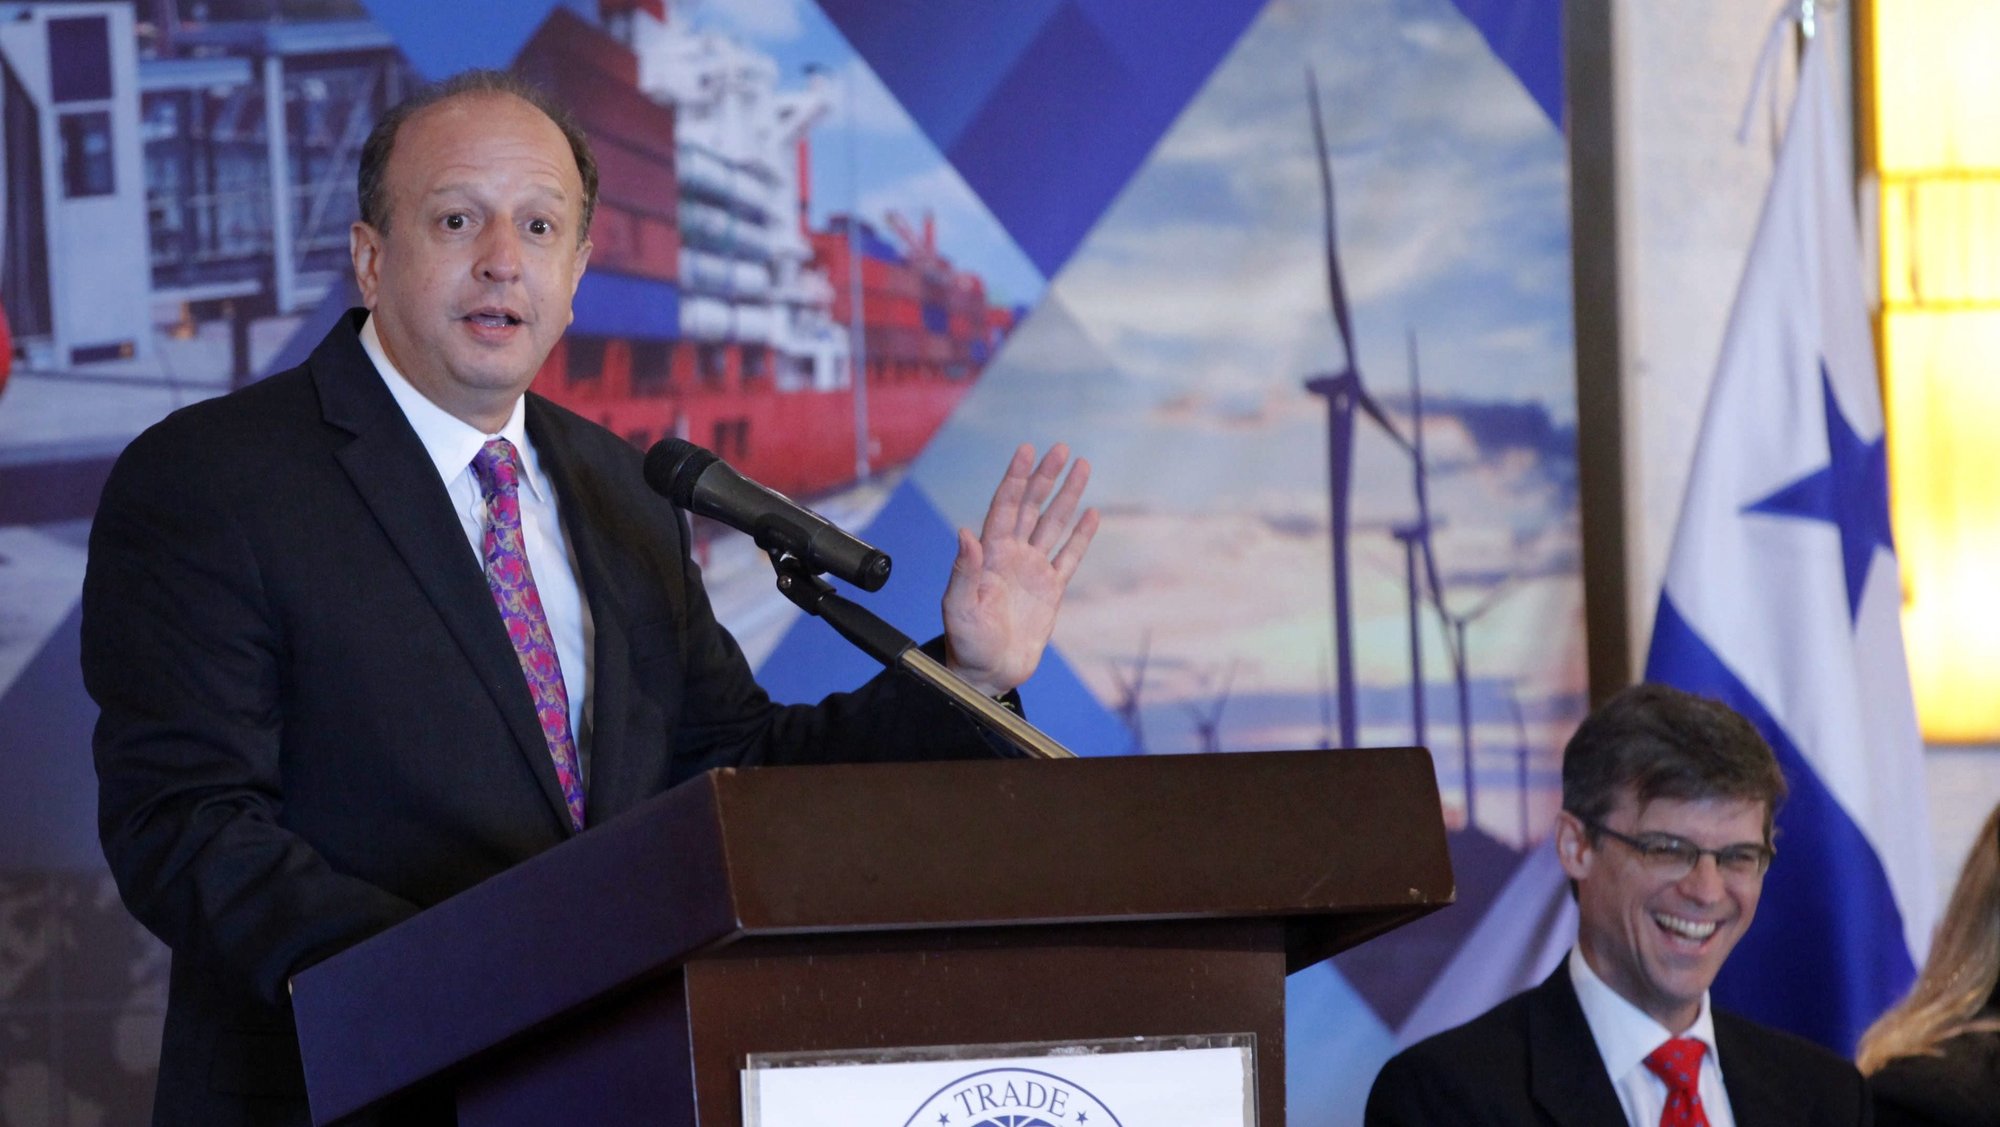 epa05674406 General Director of Public Procurement of Panama, Eduardo Corro Perez (L) and Minister Counselor of the US Embassy in Panama Kevin O&#039;Reilly (R) participate in the opening ceremony of the workshop &#039;Obtaining Value in Public Procurement&#039; in Panama City, Panama, 13 December 2016. The US and Panama signed a memorandum of understanding to make public tenders more transparent, which involves, among other things, improving the capacity of Panamanian officials to analyze more accurately the offers of different suppliers.  EPA/Alejandro Bolívar